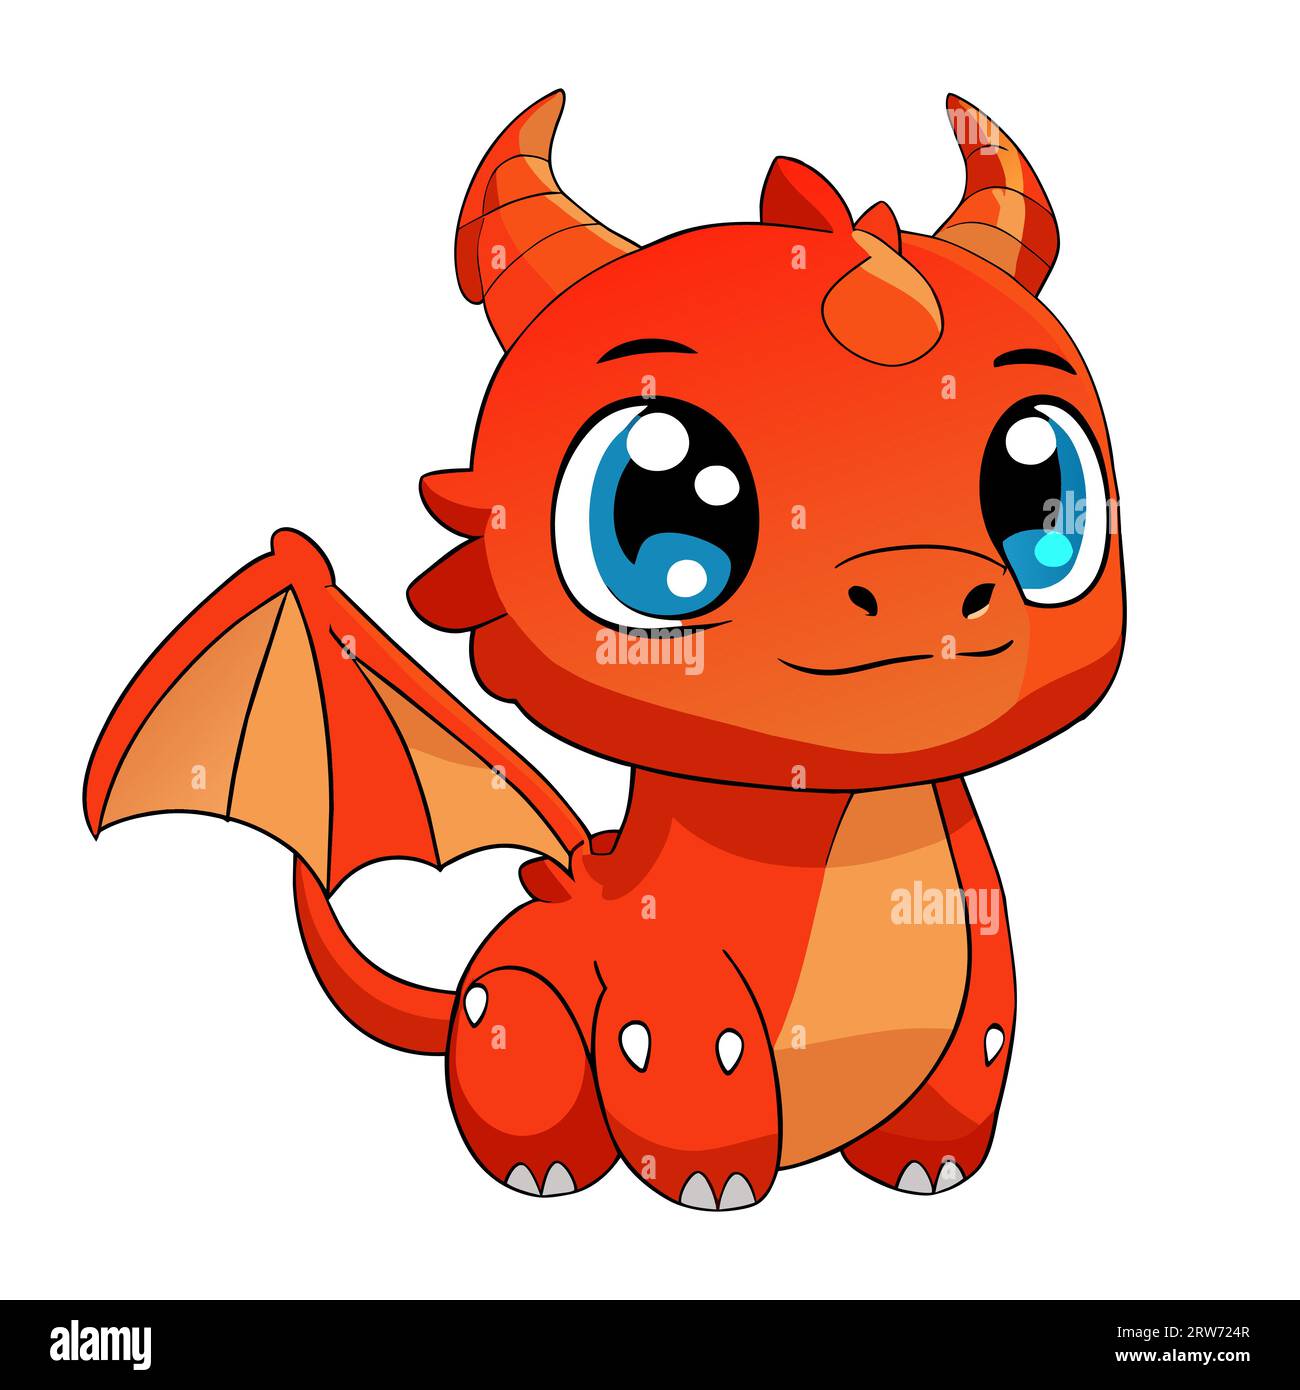 Cute cheerful red orange dragon, big blue eyes and wings. Dragon smiles. Vector isolated on white. Cartoon. Chinese New Year talisman. Zodiac sign. Sticker, calendar, print, badge, textile, stationery Stock Vector